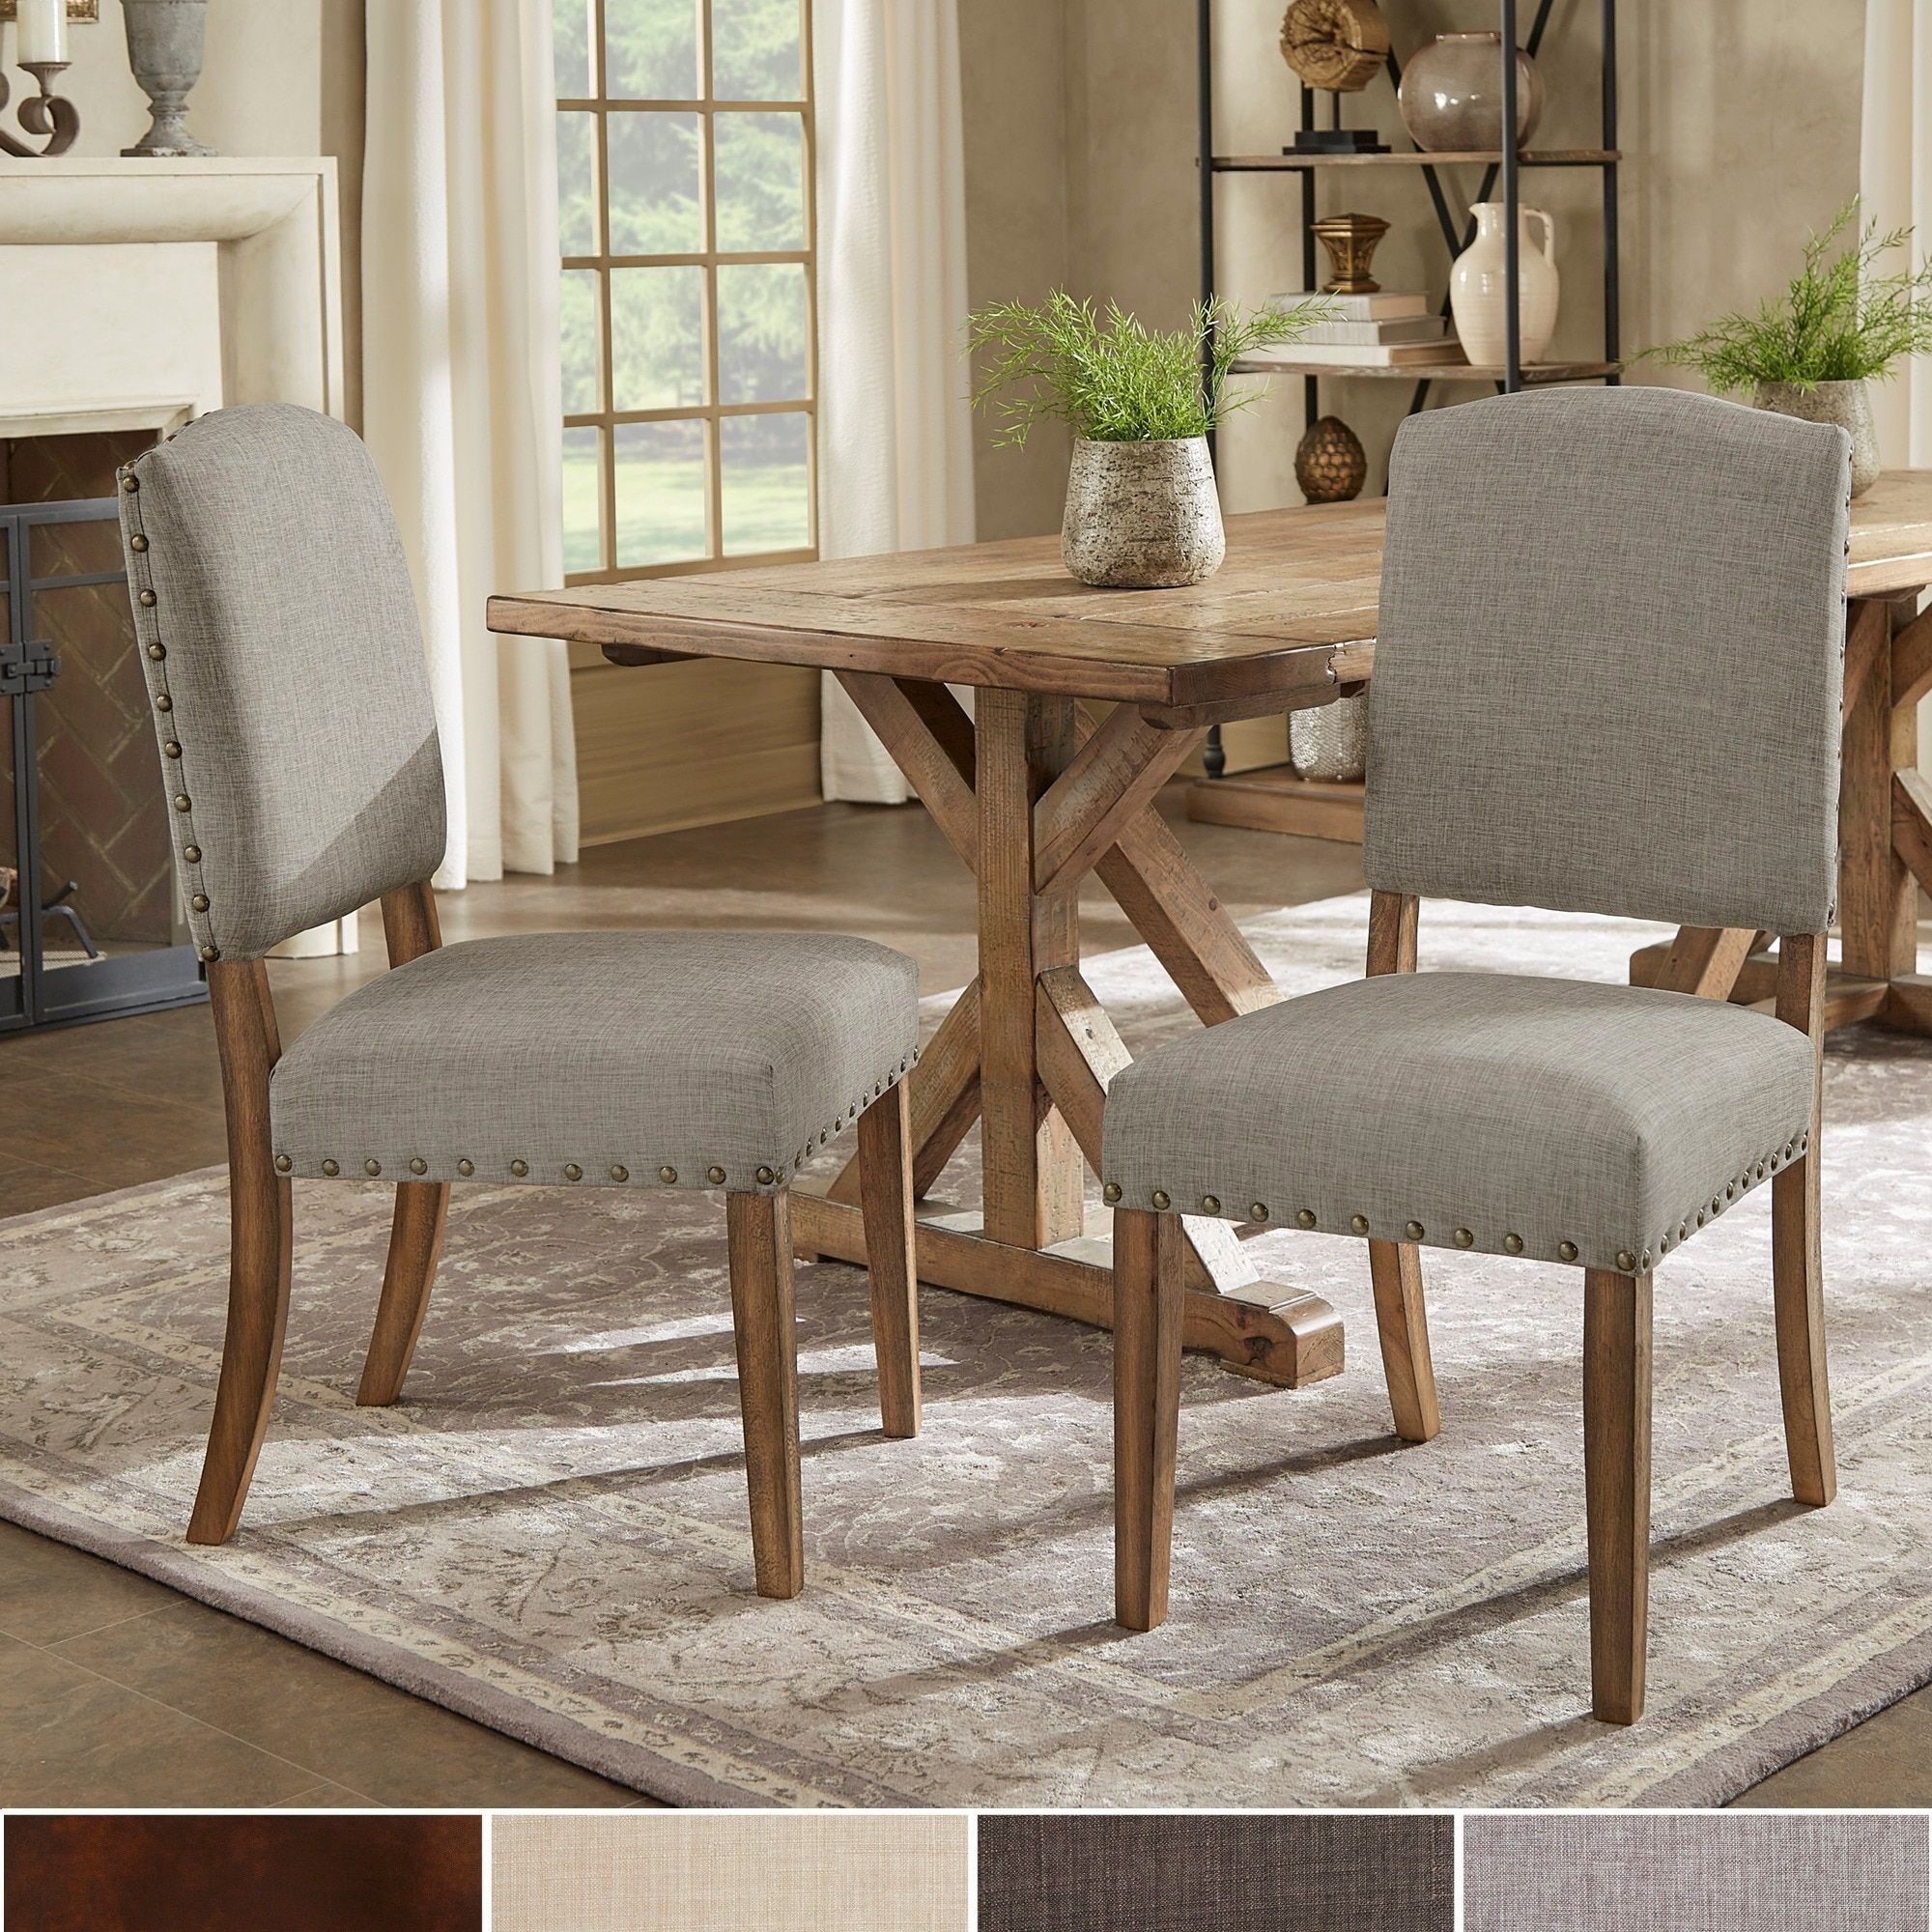 2018 Benchwright Nailhead Upholstered Dining Side Chairssignal Hills Within Caden Upholstered Side Chairs (View 19 of 20)